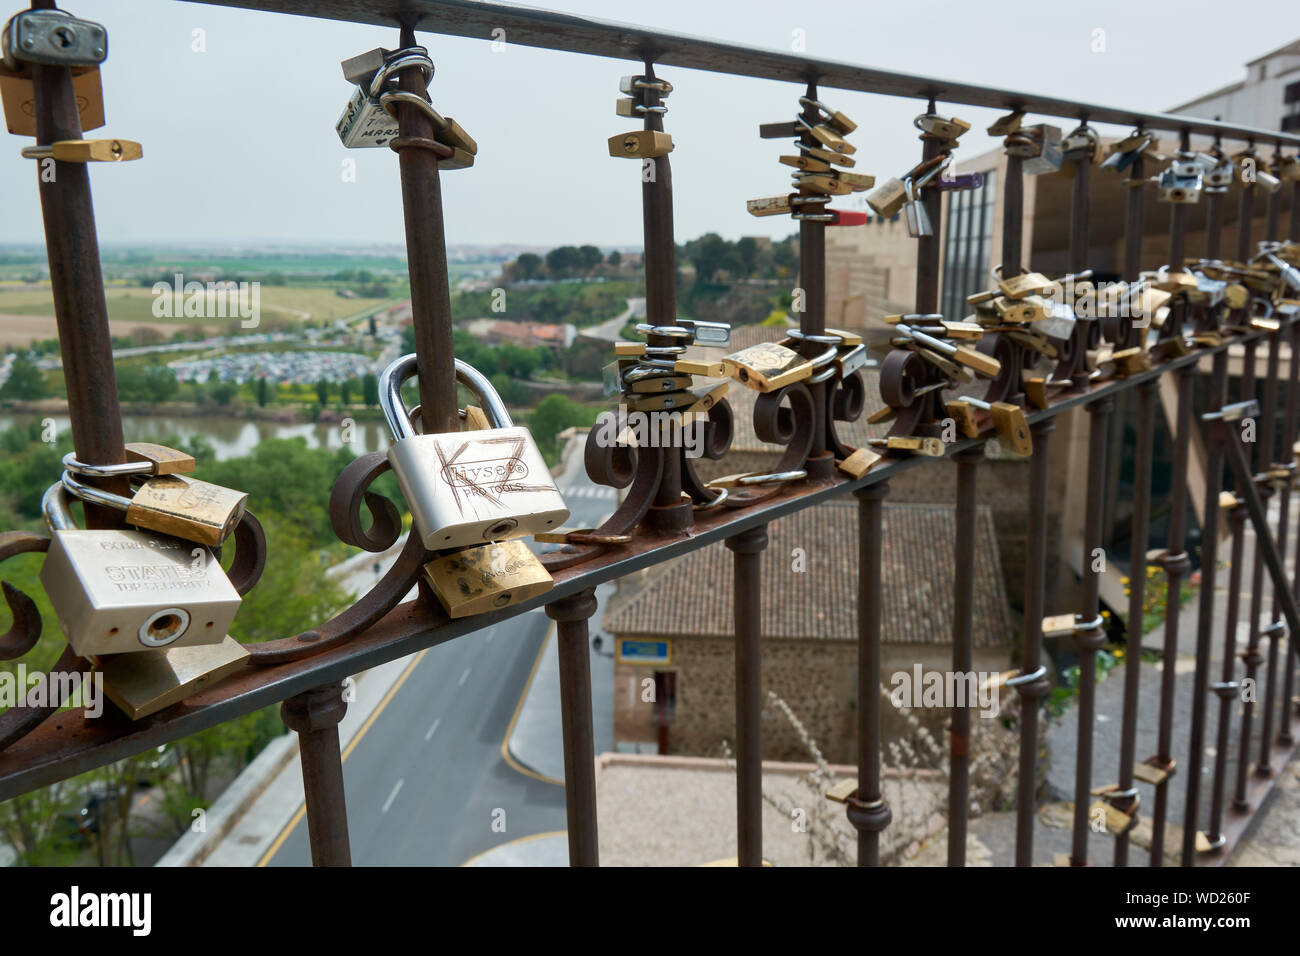 TOLEDO, SPAIN - APRIL 24, 2018: Locks of love in Toledo, hooked to a fence by lovers as a proof of eternal love. Stock Photo